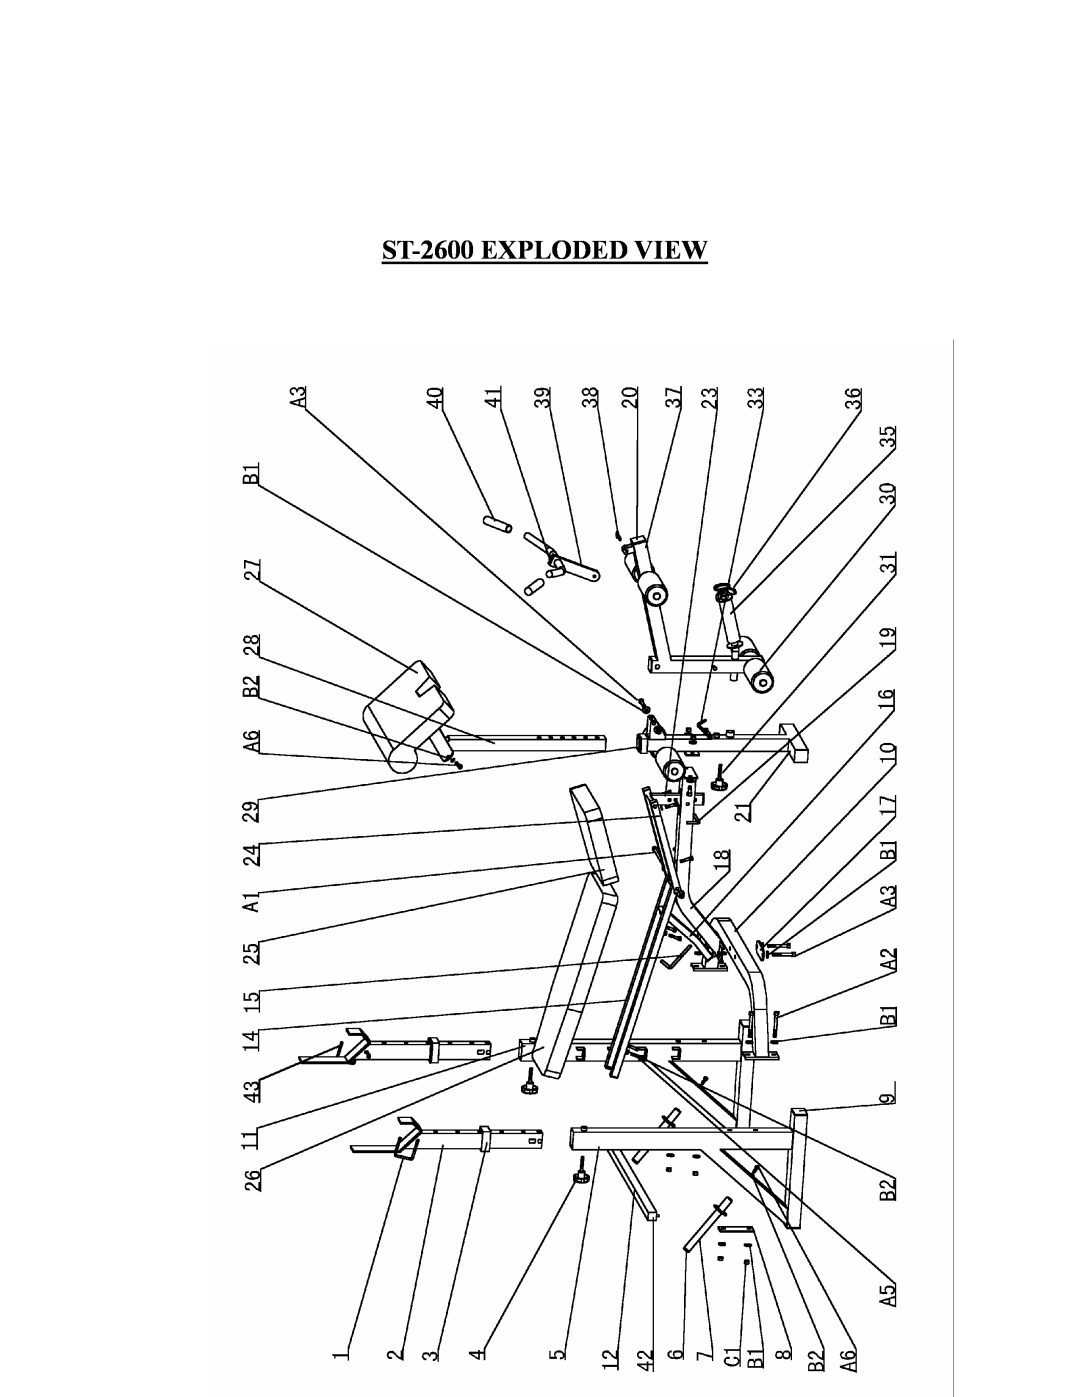 Keys Fitness owner manual ST-2600 EXPLODED VIEW 